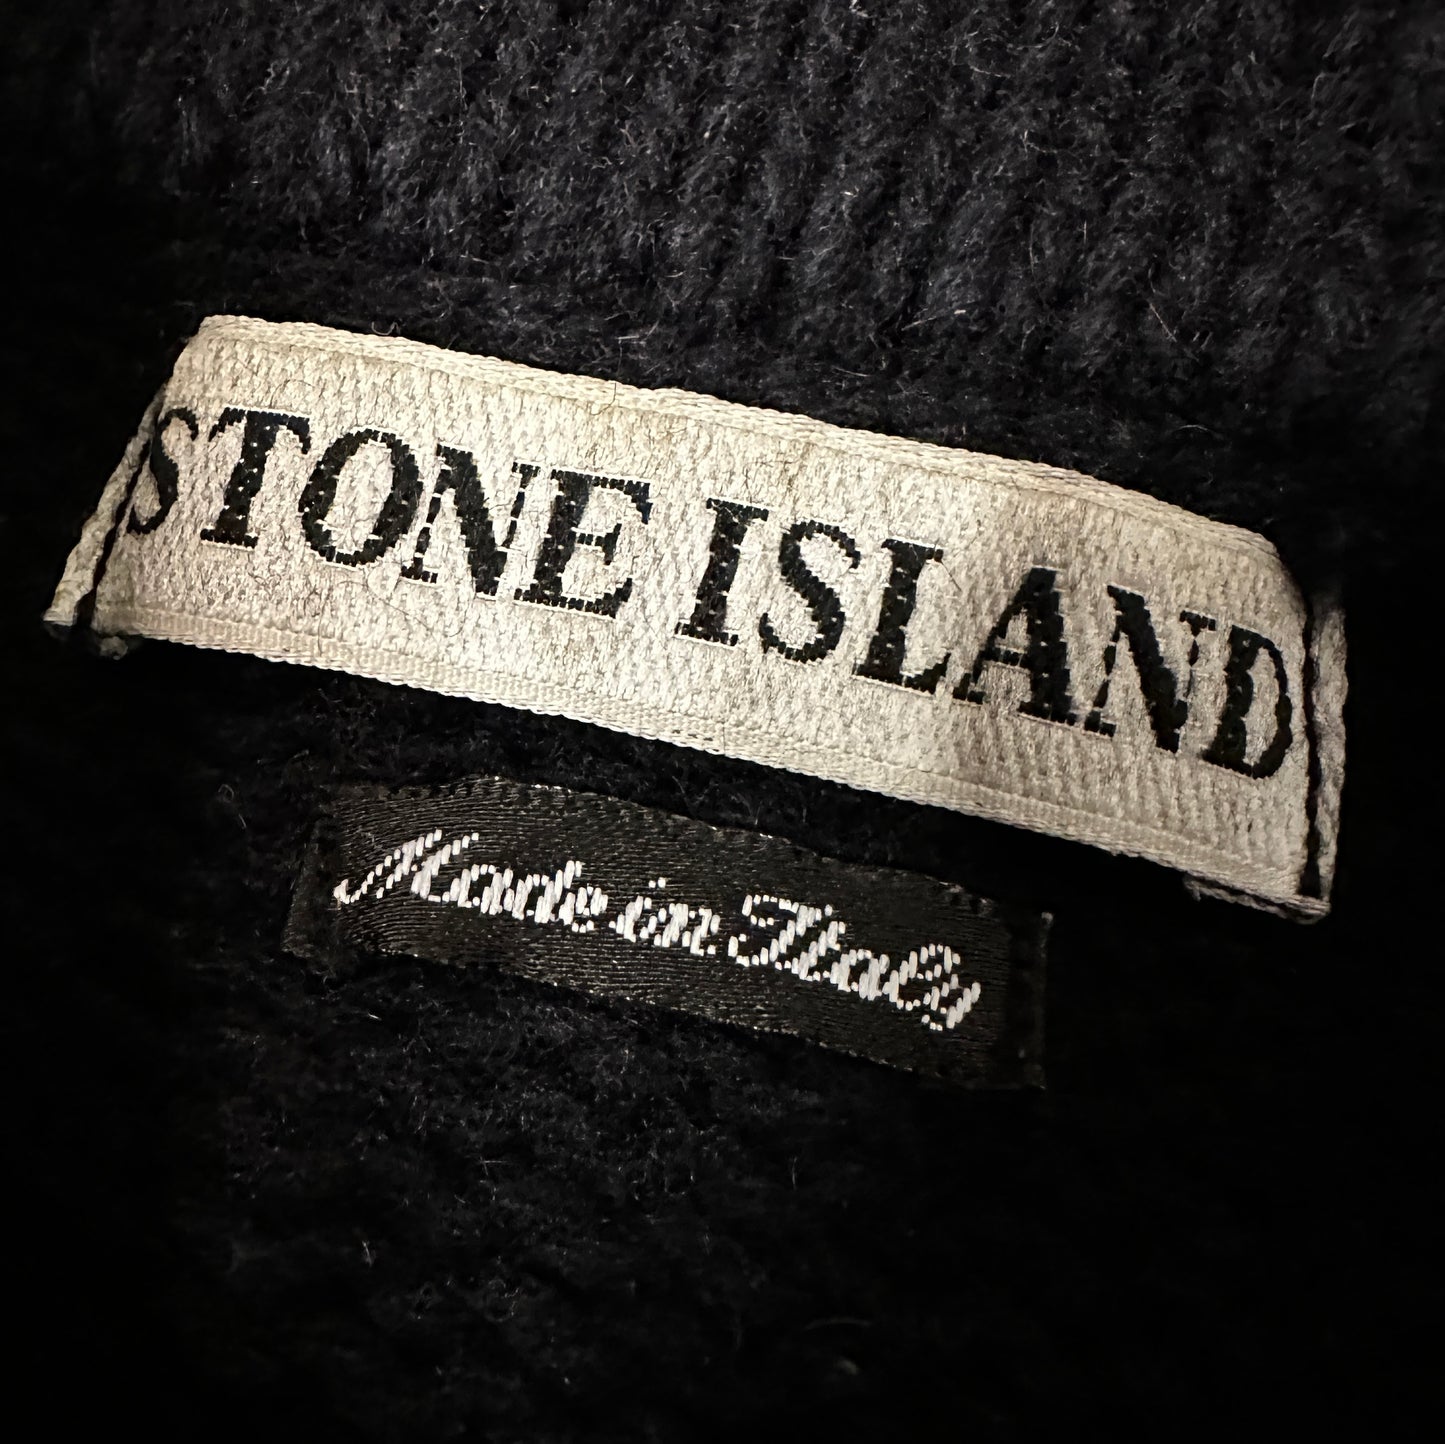 Stone Island Vintage 1998 Navy Turtleneck Wool Knit Sweater - L - Made in Italy